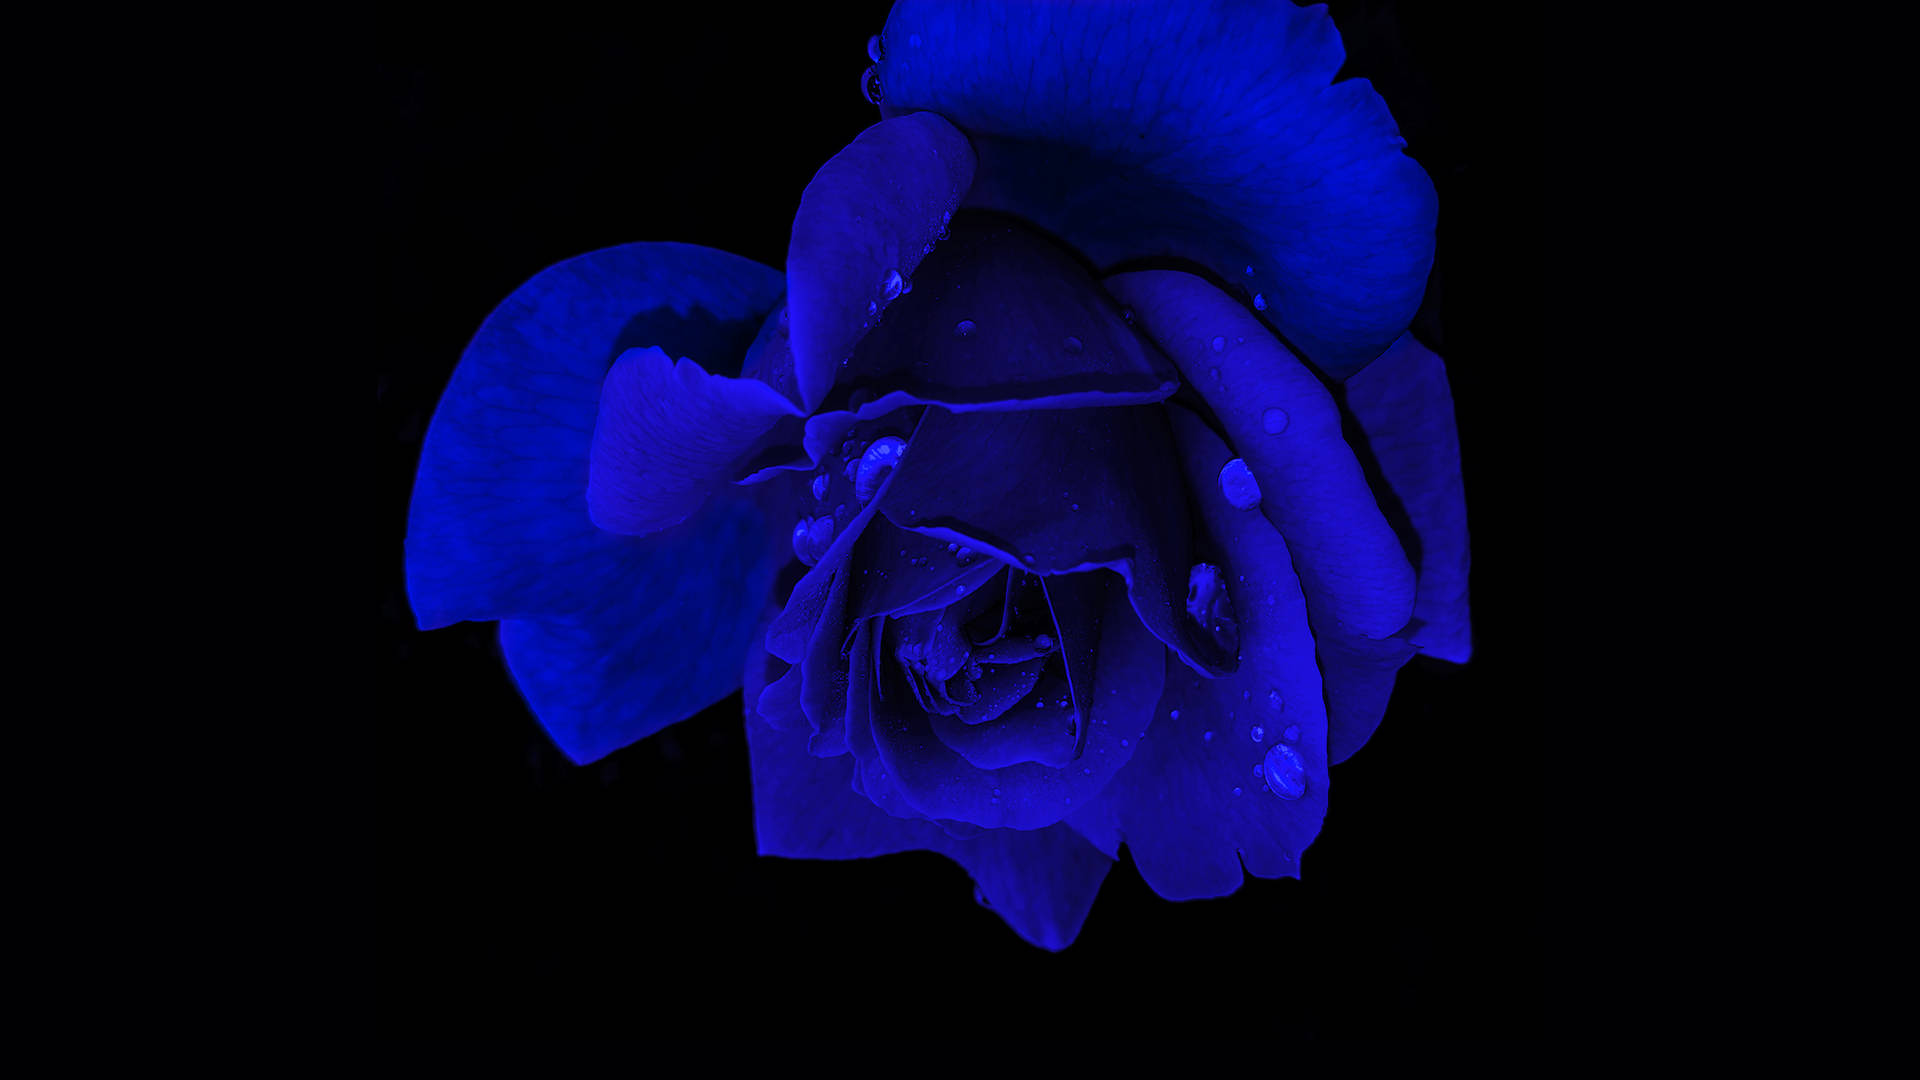 Enigmatic Blue Rose on a 4K Black Screen Background Wallpaper